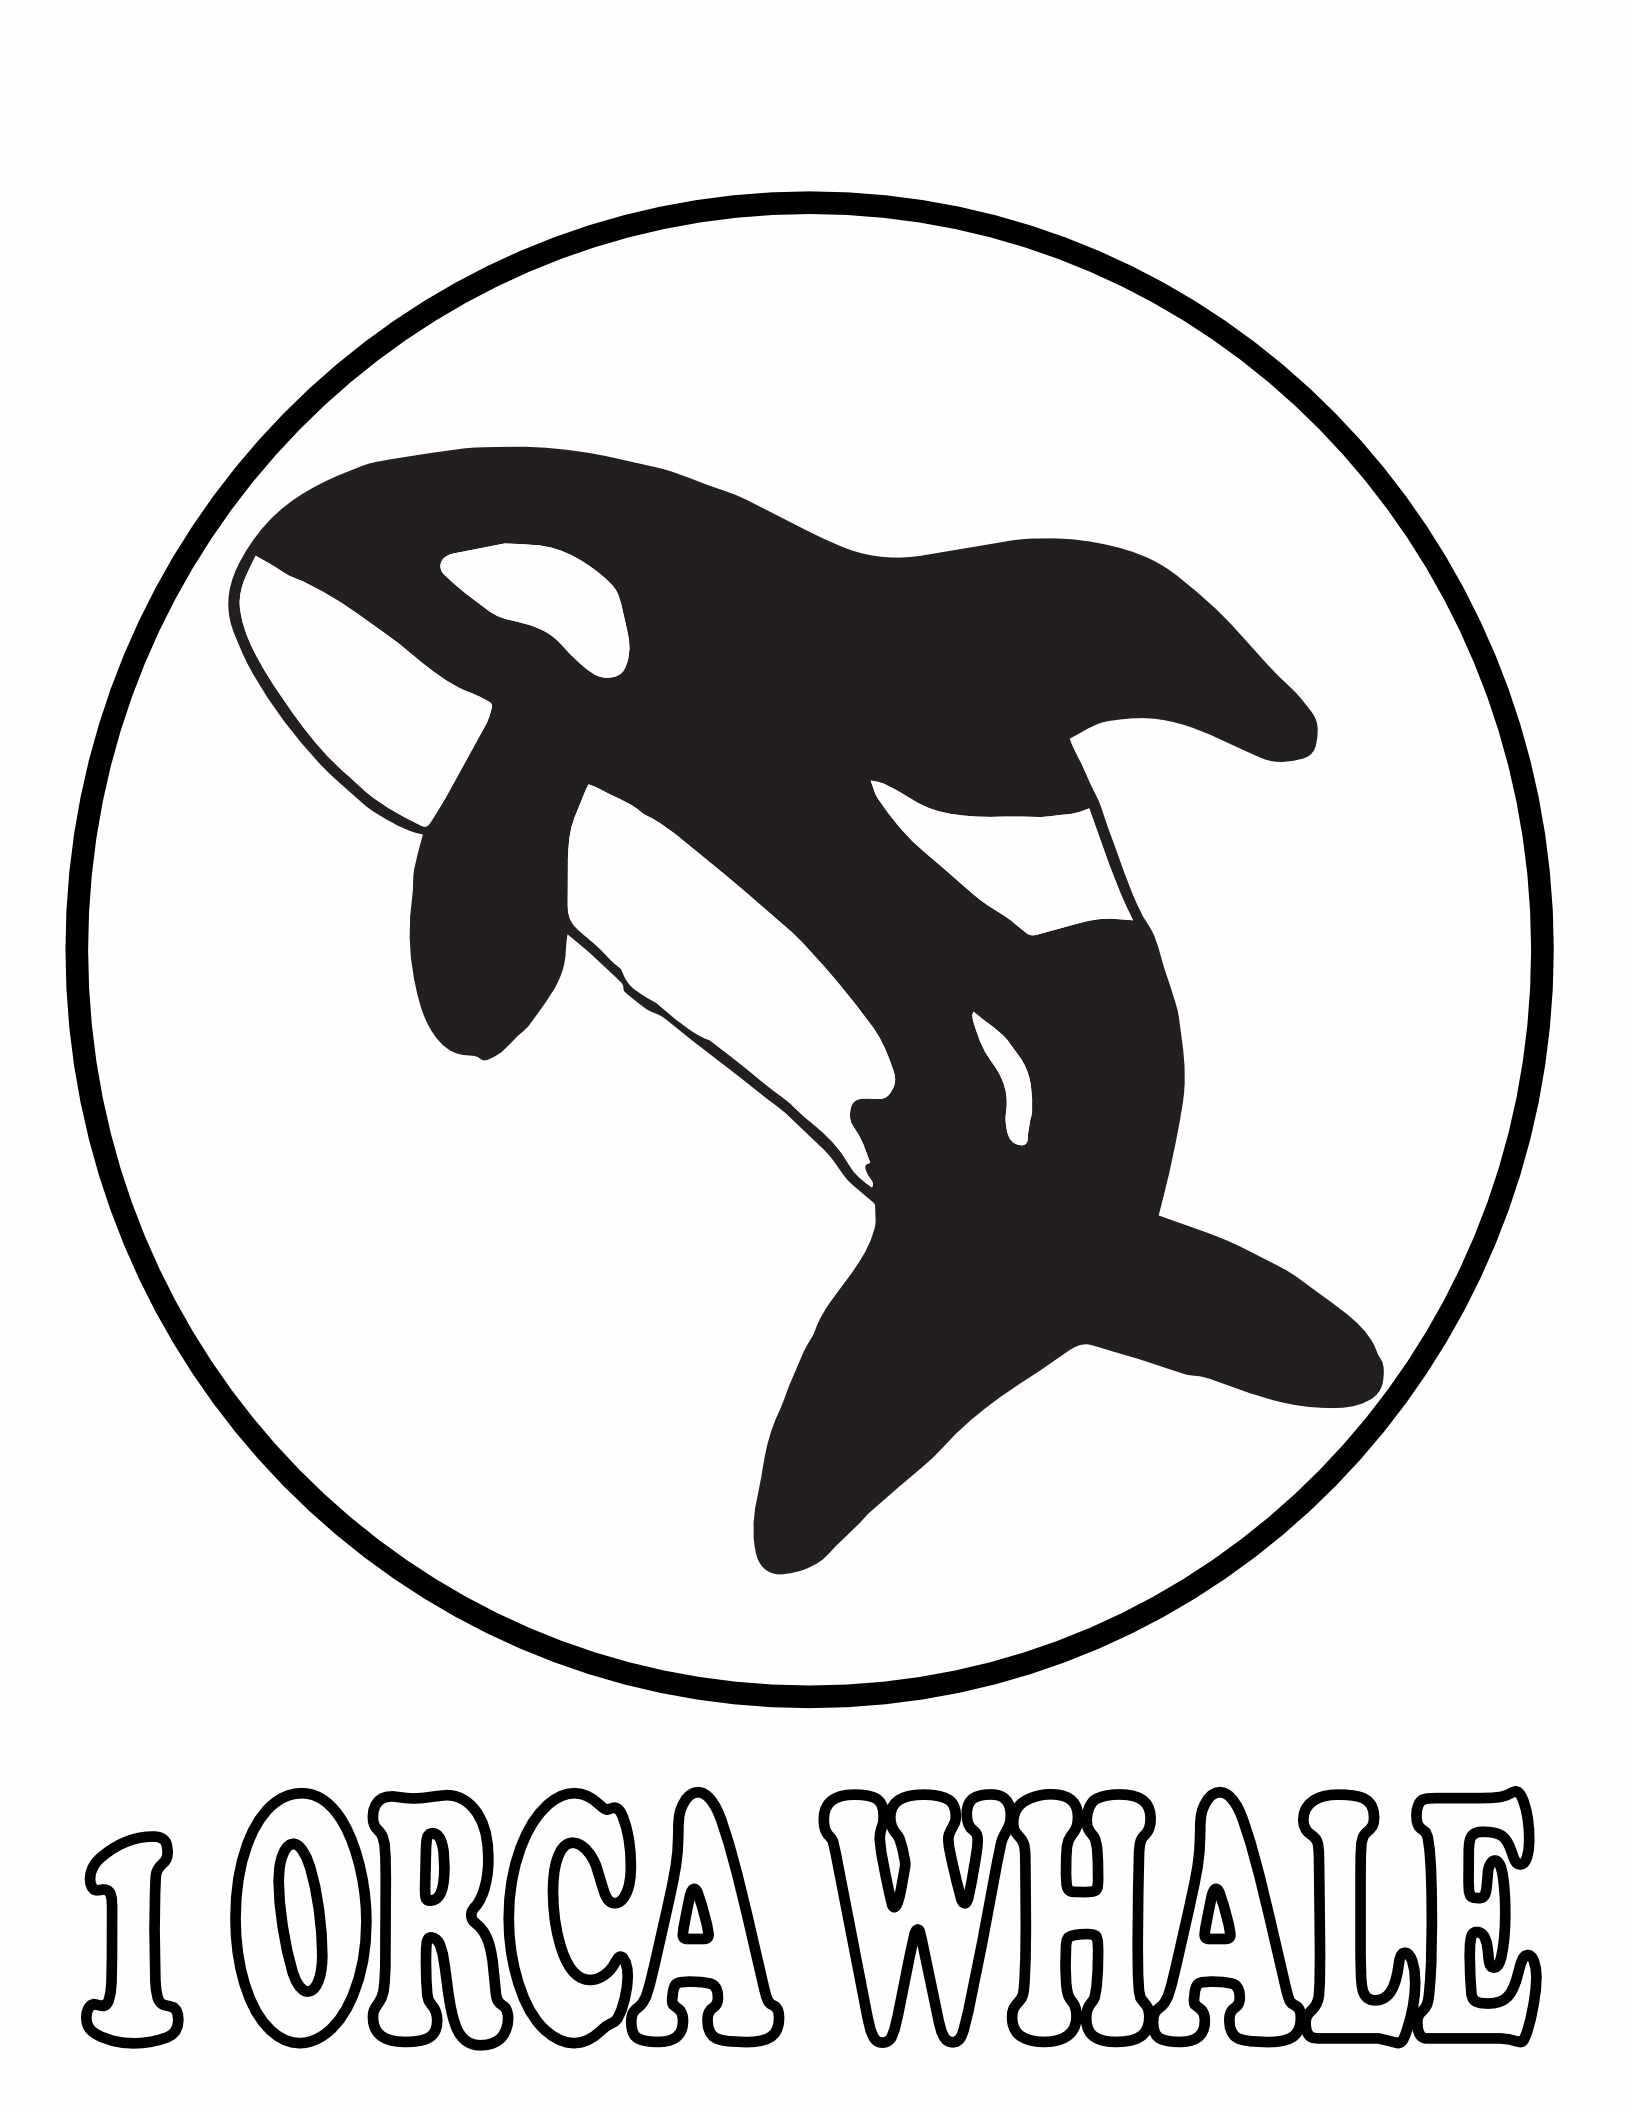 10 Free Animal Number  Pages - 1 orca whale